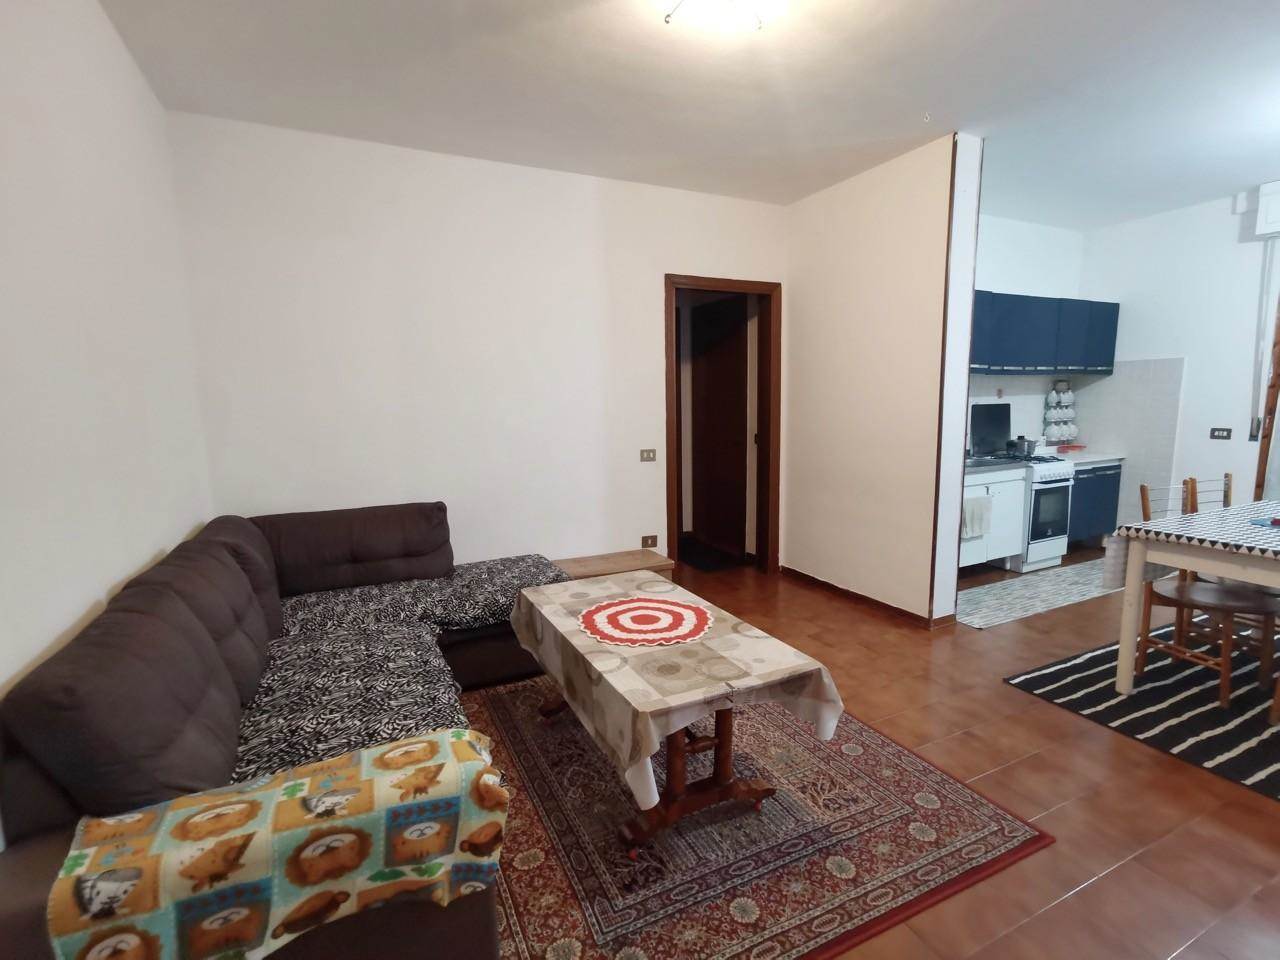 NAVACCHIO, CASCINA, Apartment for sale of 80 Sq. mt., Heating Individual heating system, Energetic class: F, Epi: 150 kwh/m2 year, placed at 1° on 3, 